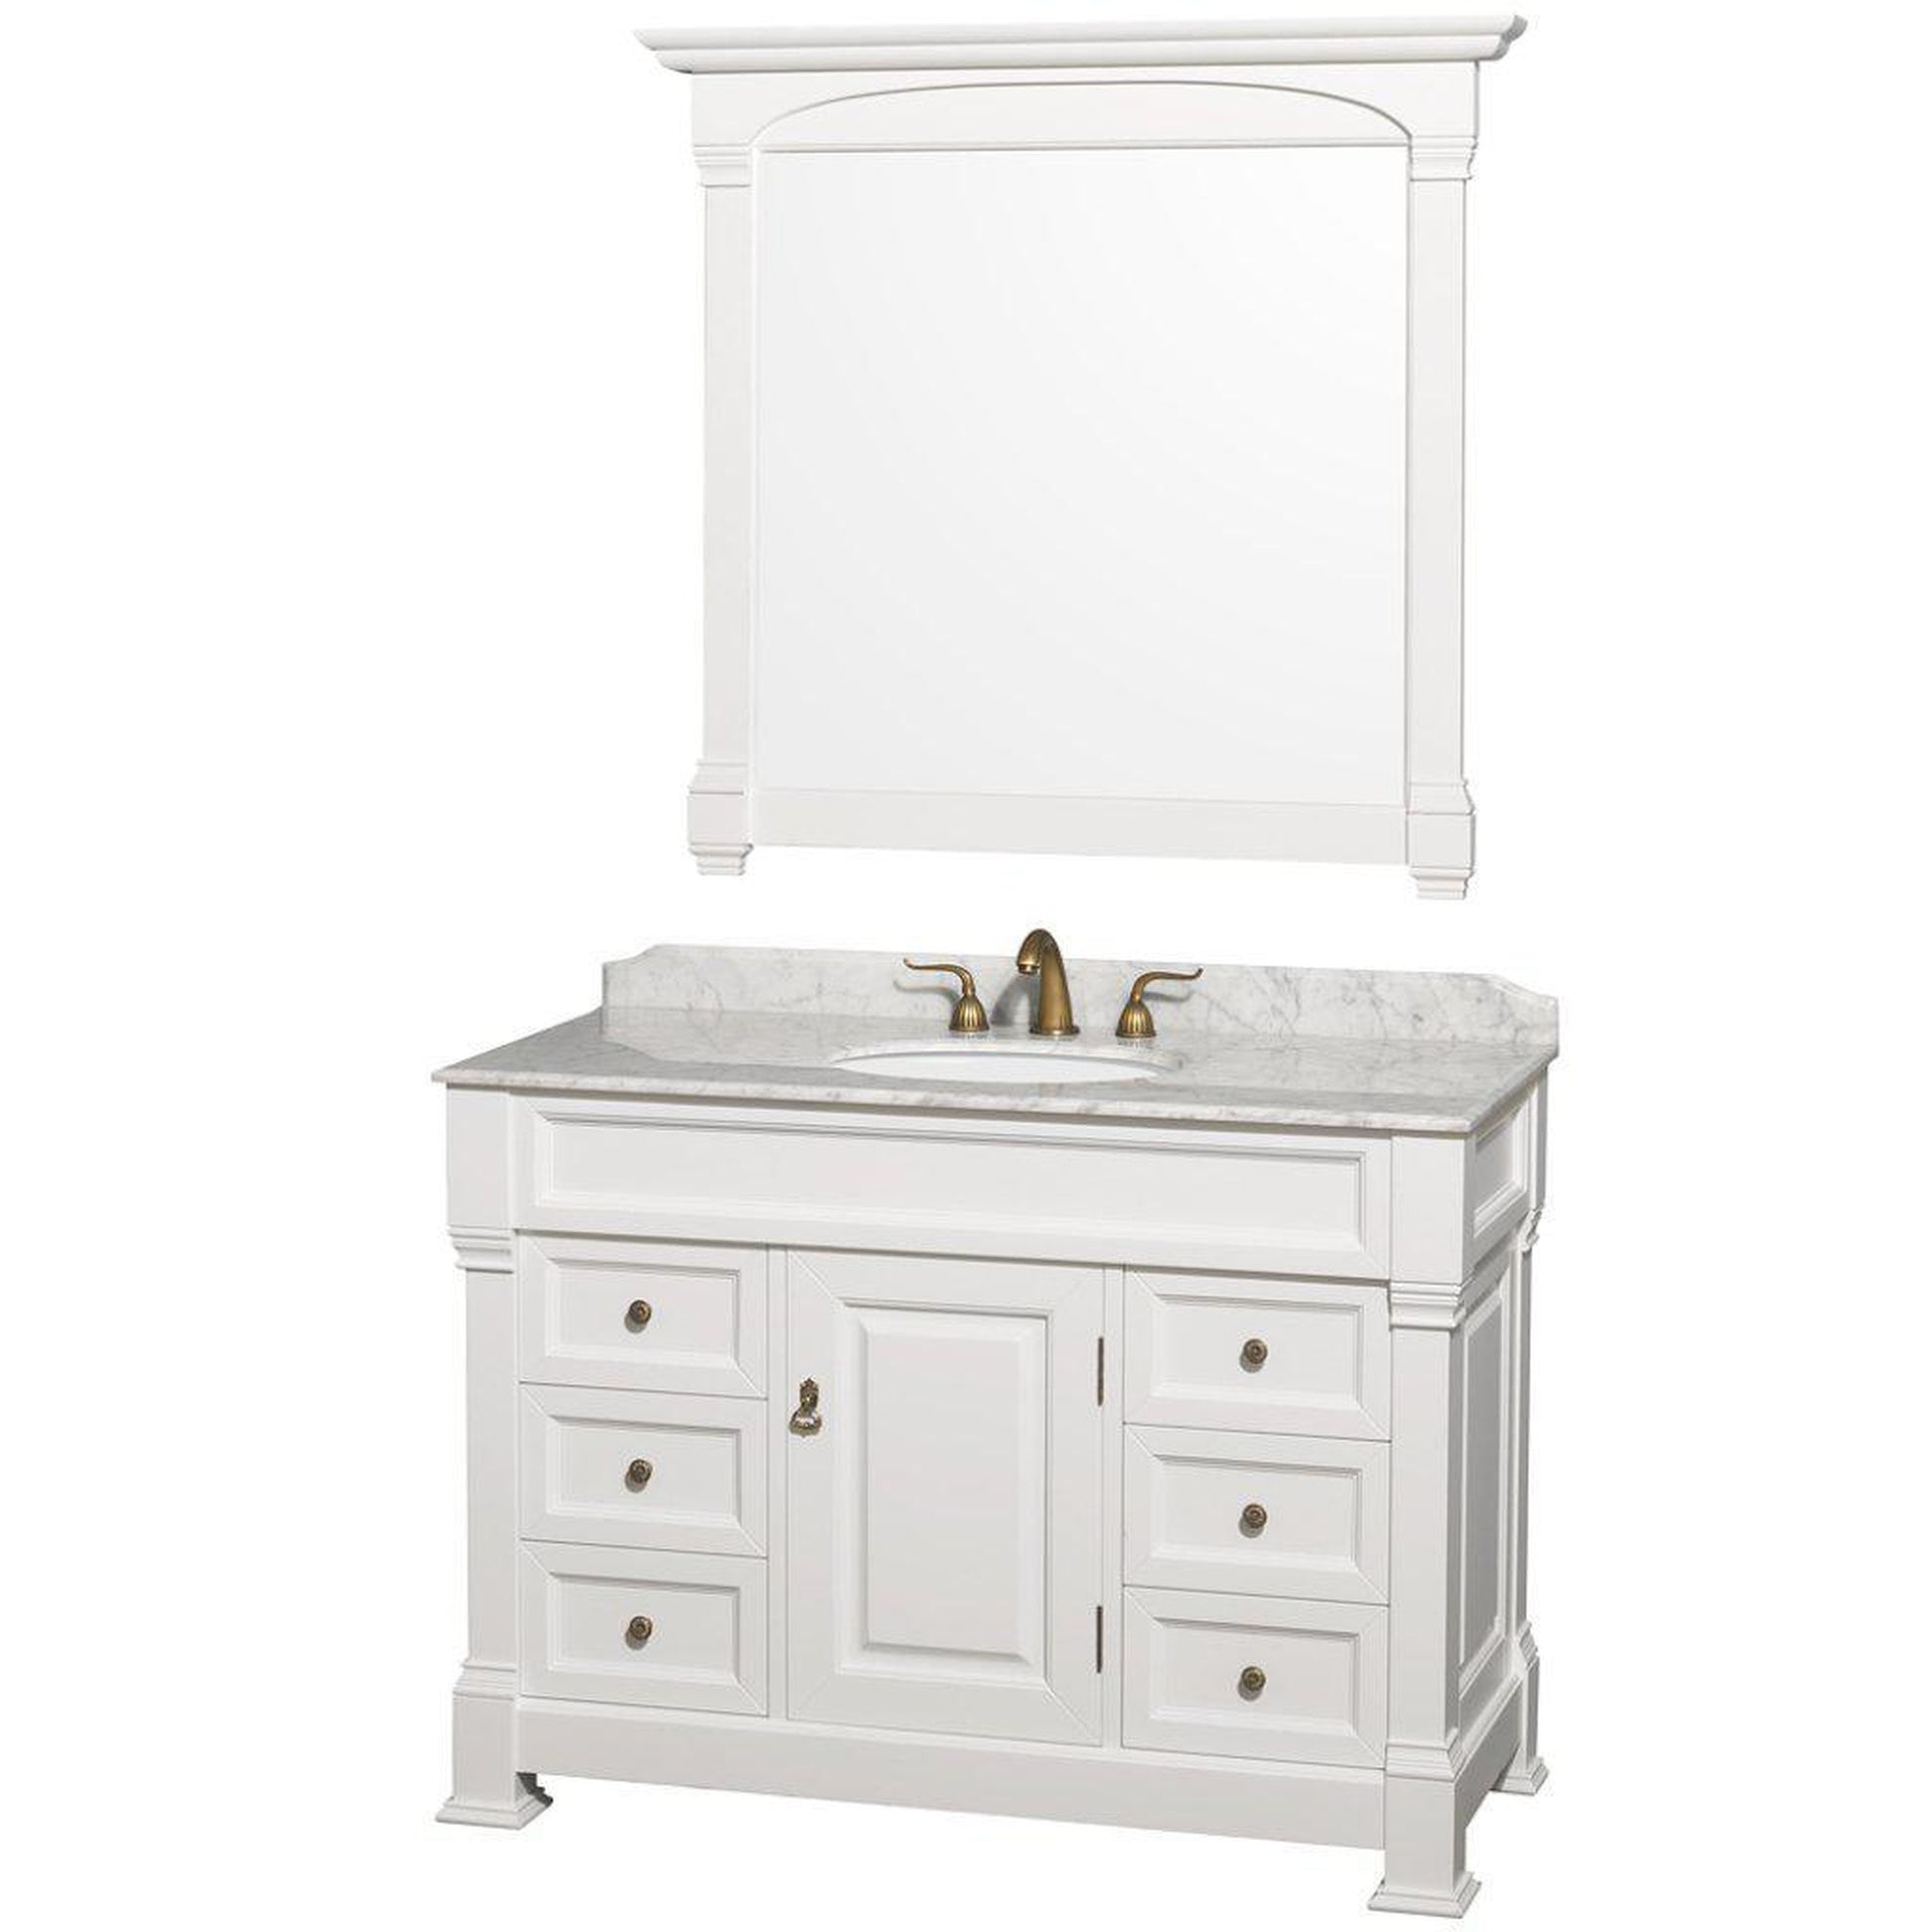 Wyndham Collection Andover 48" Single Bathroom White Vanity Set With White Carrara Marble Countertop And Undermount Oval Sink, And 44" Mirror